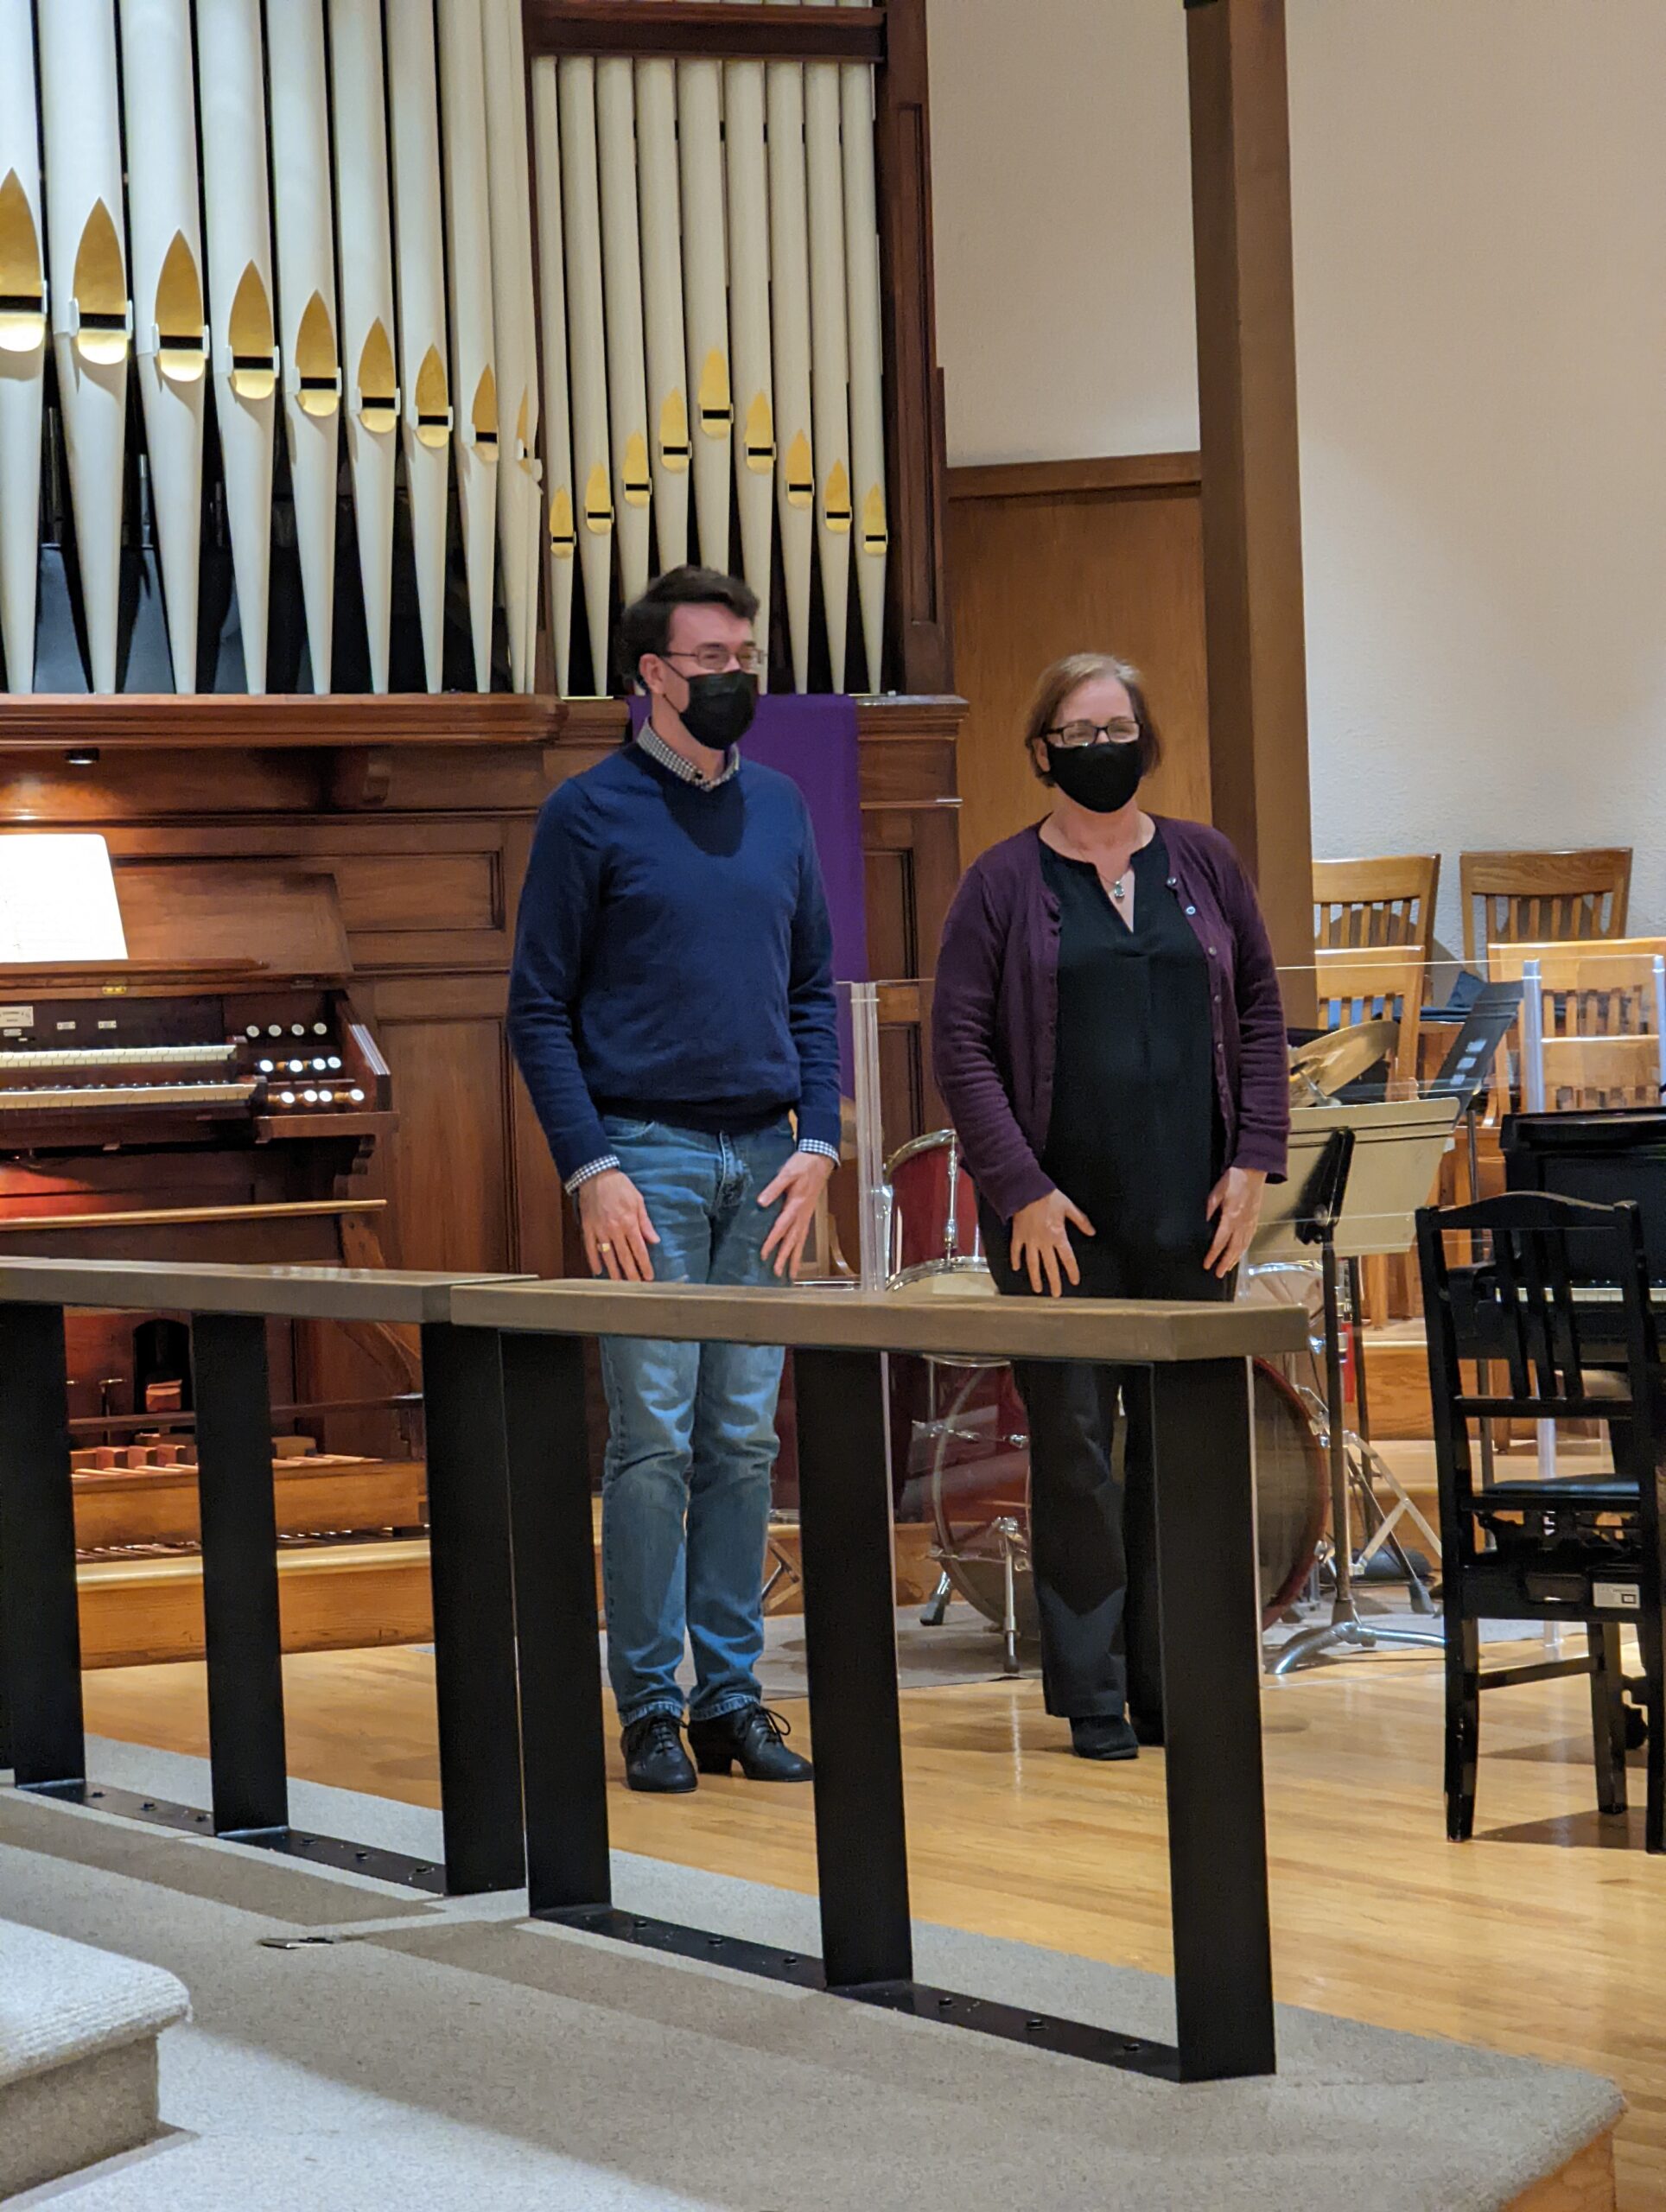 Wyatt Smith and Sheila Bristow standing in front of organ at front of church